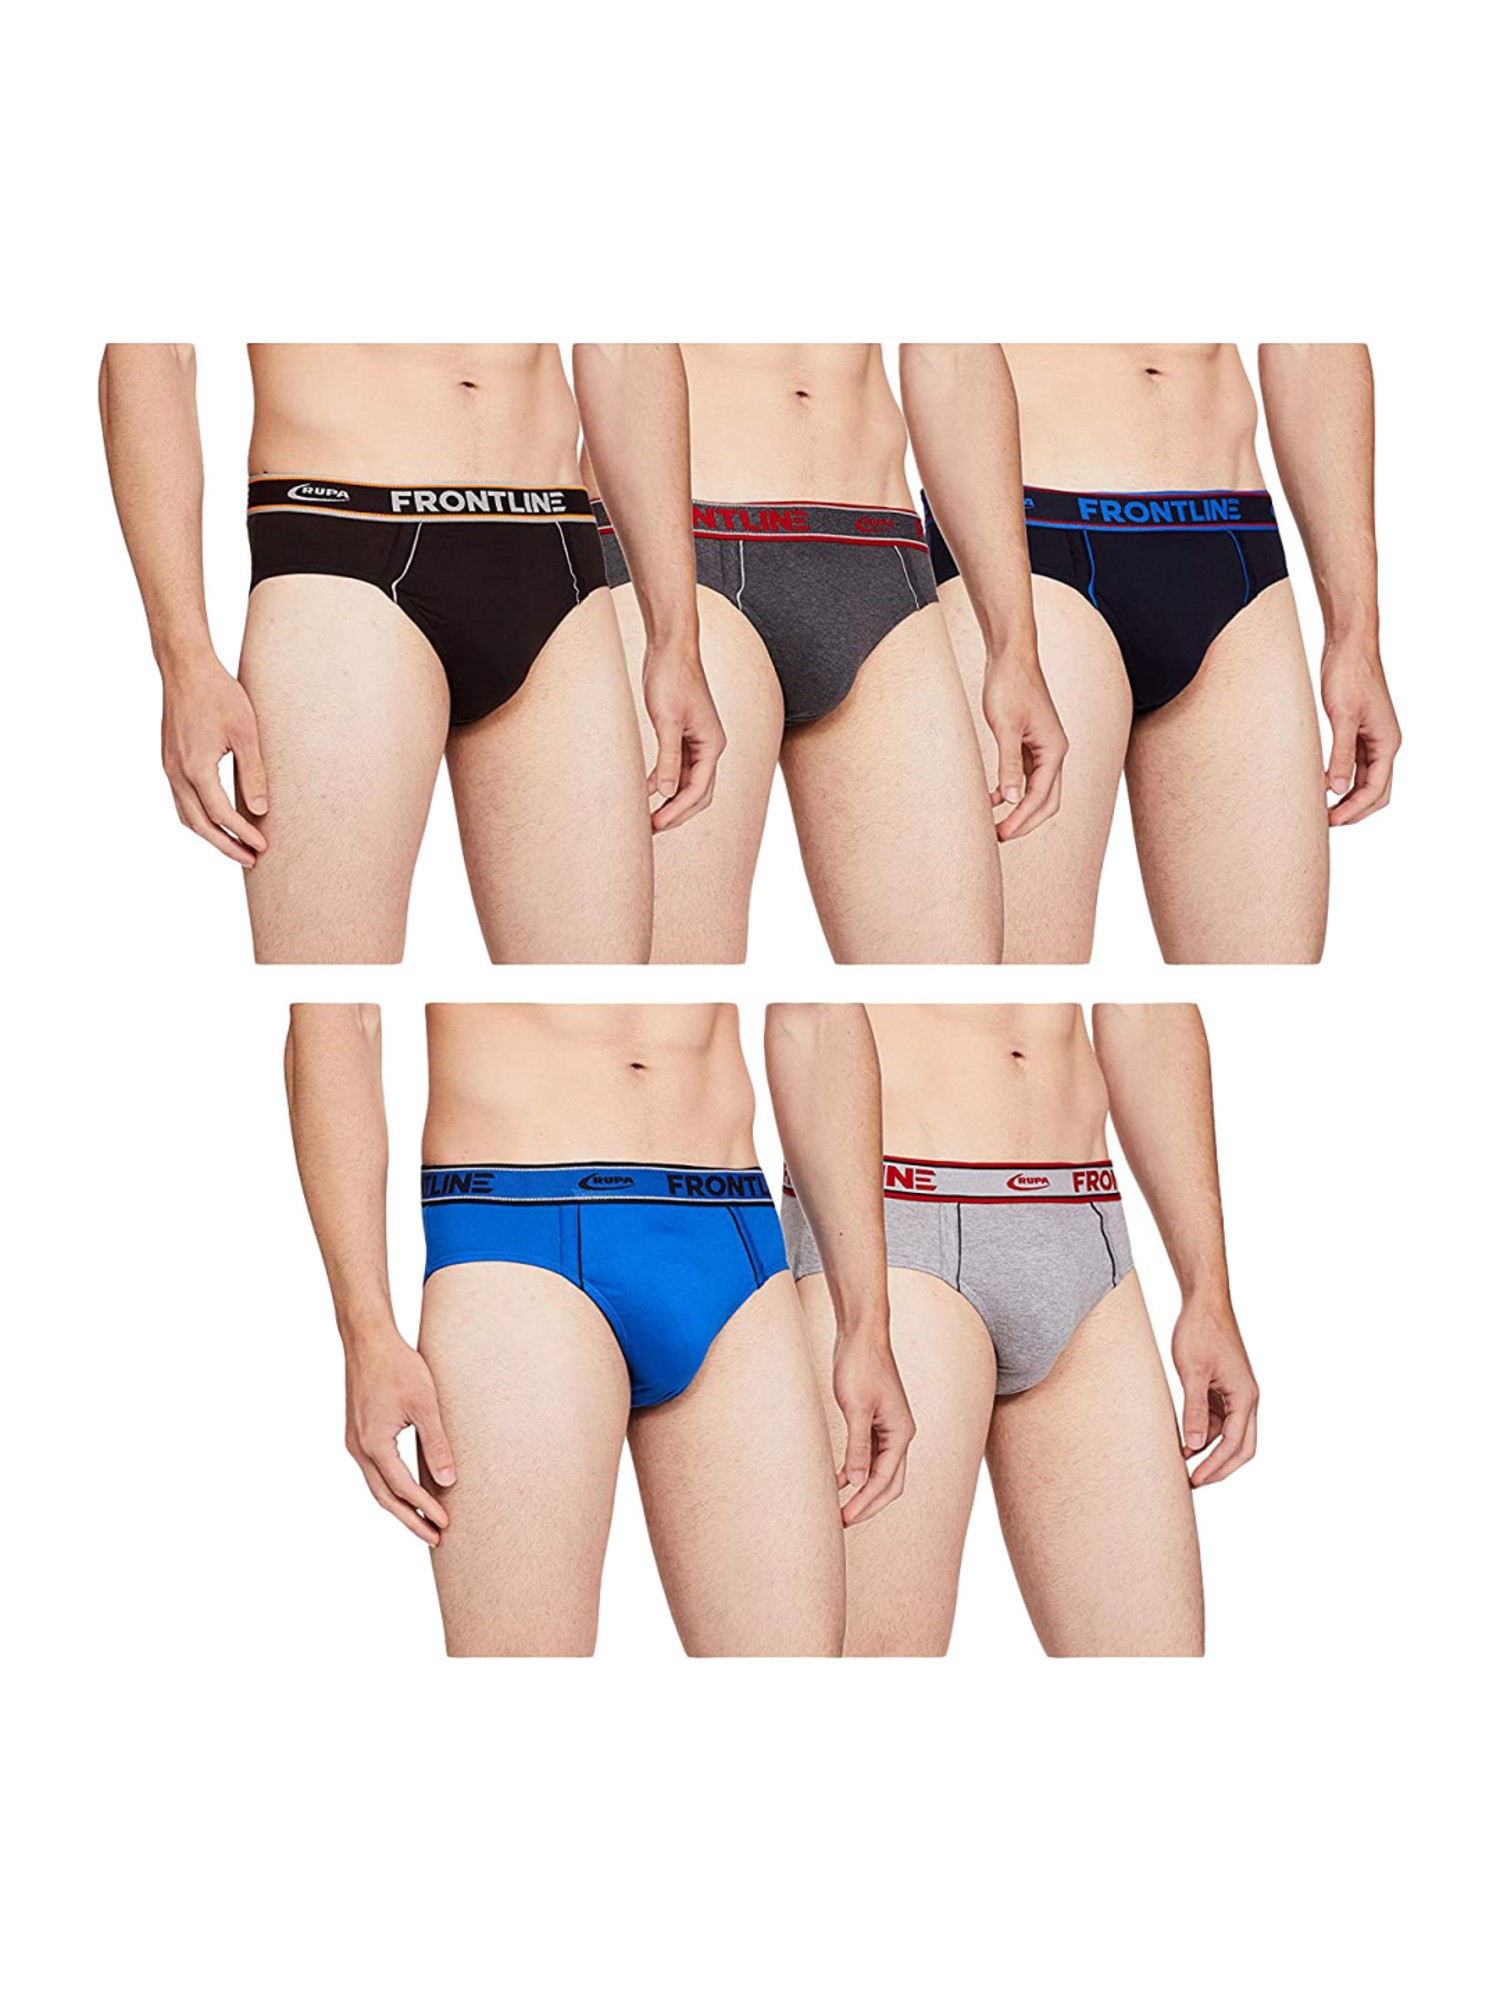 PRICE UP - RUPA Frontline Men's Cotton Brief (Pack of 5) at Rs. 157